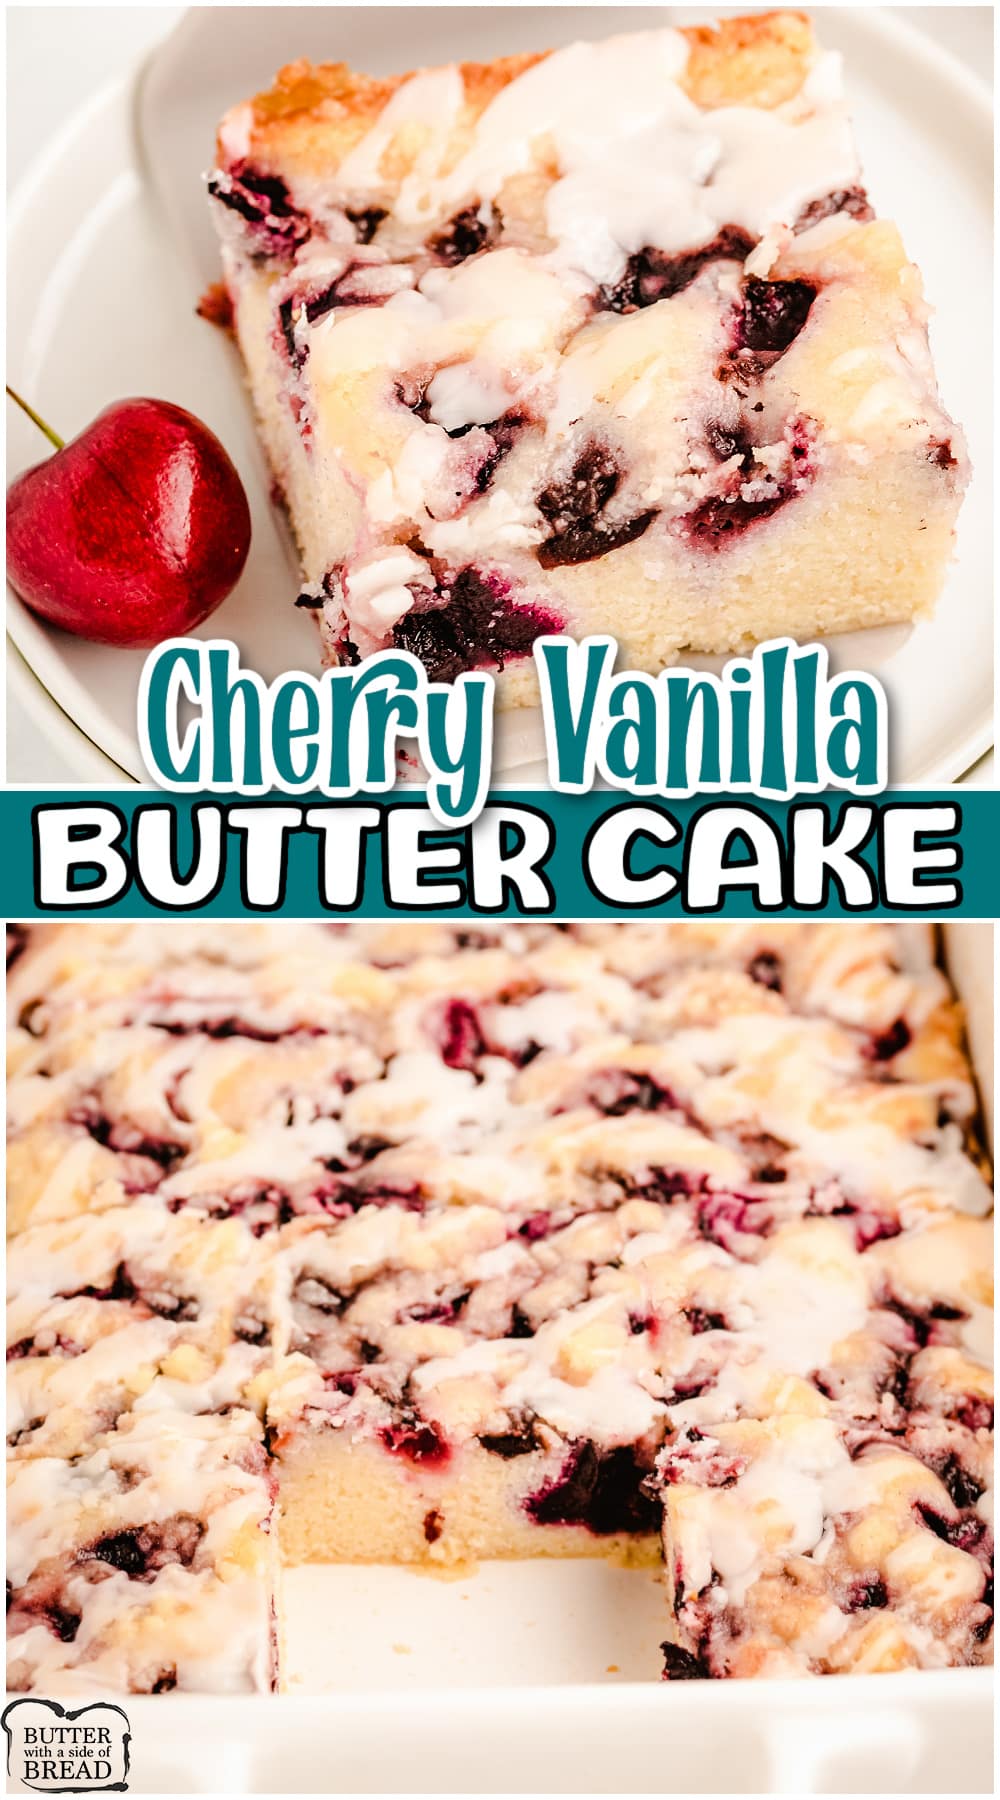 Buttery Cherry Cake is made with simple ingredients & is perfect for cherry lovers! Fantastic cherry almond flavor in this lovely, buttery homemade sheet cake recipe.